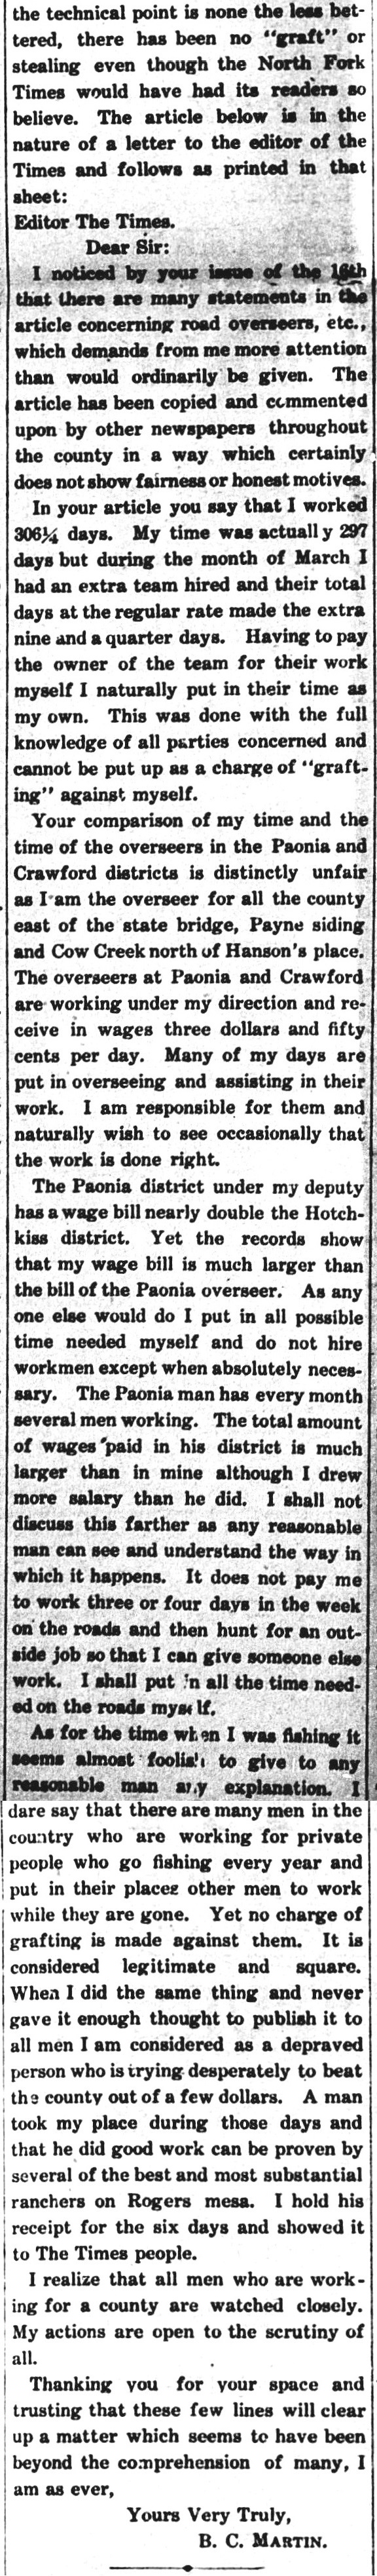 Continuation of article from the
                Delta Independent of 9 March 1906, titled 'Mr. Martin Replies'